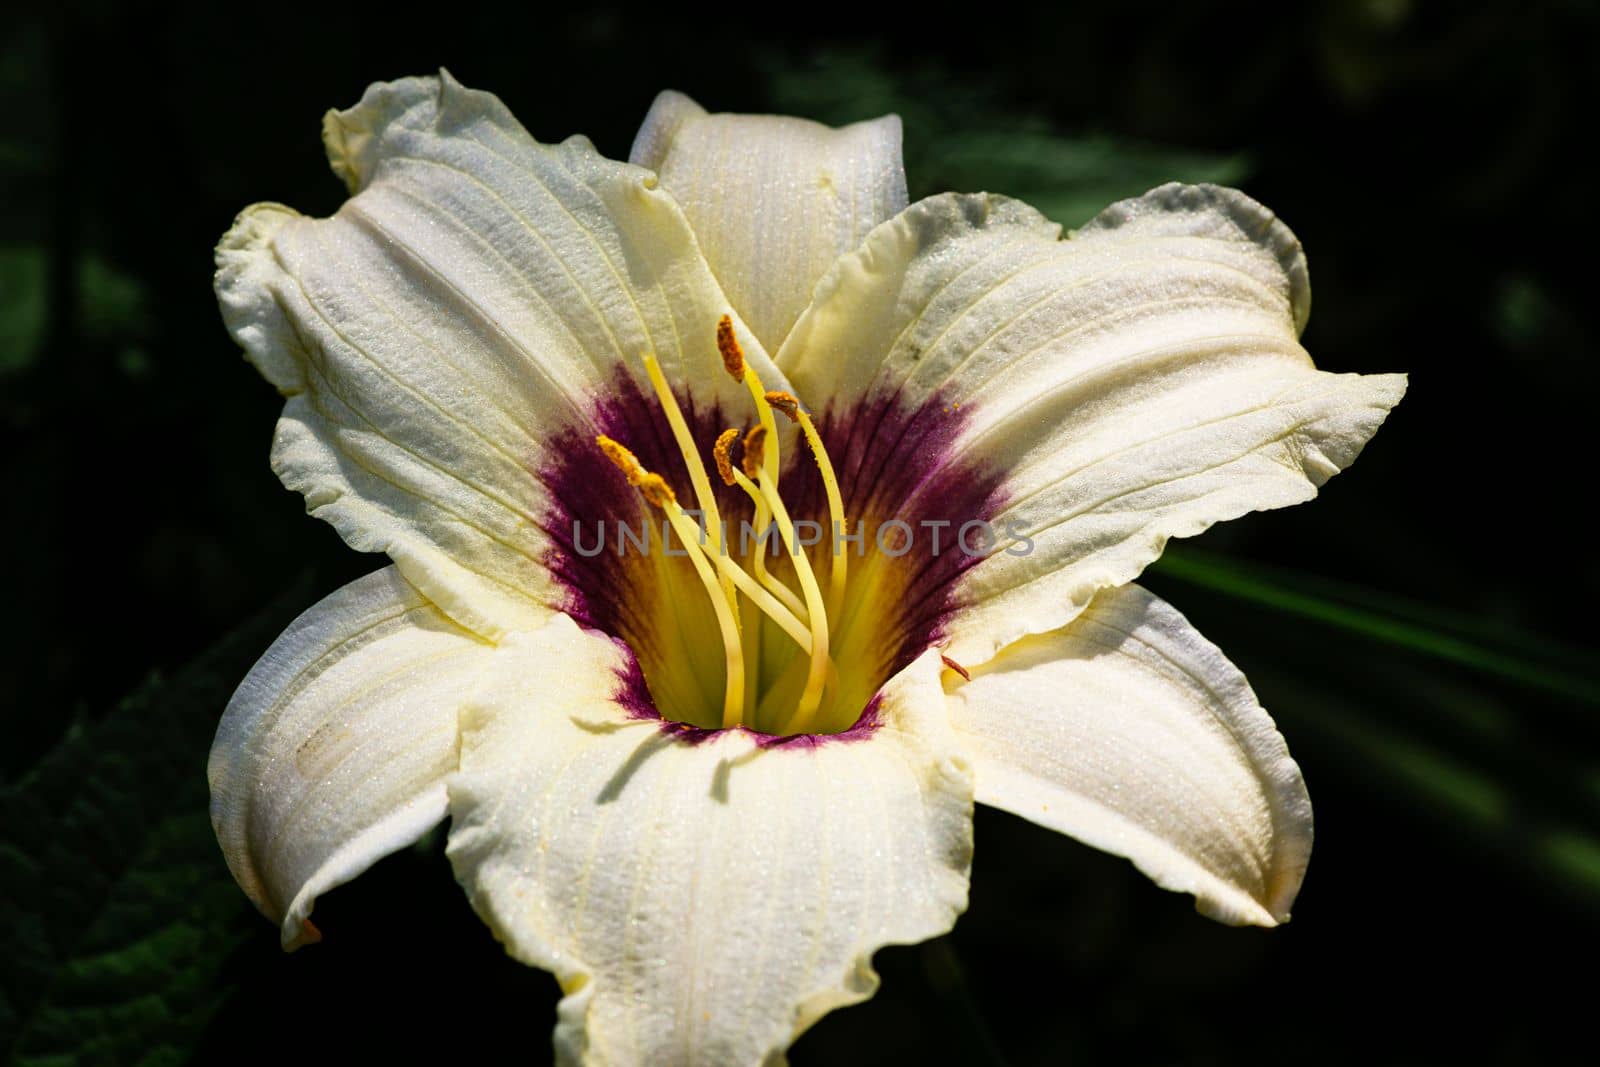 Close up of a white lily with a purple and yellow center